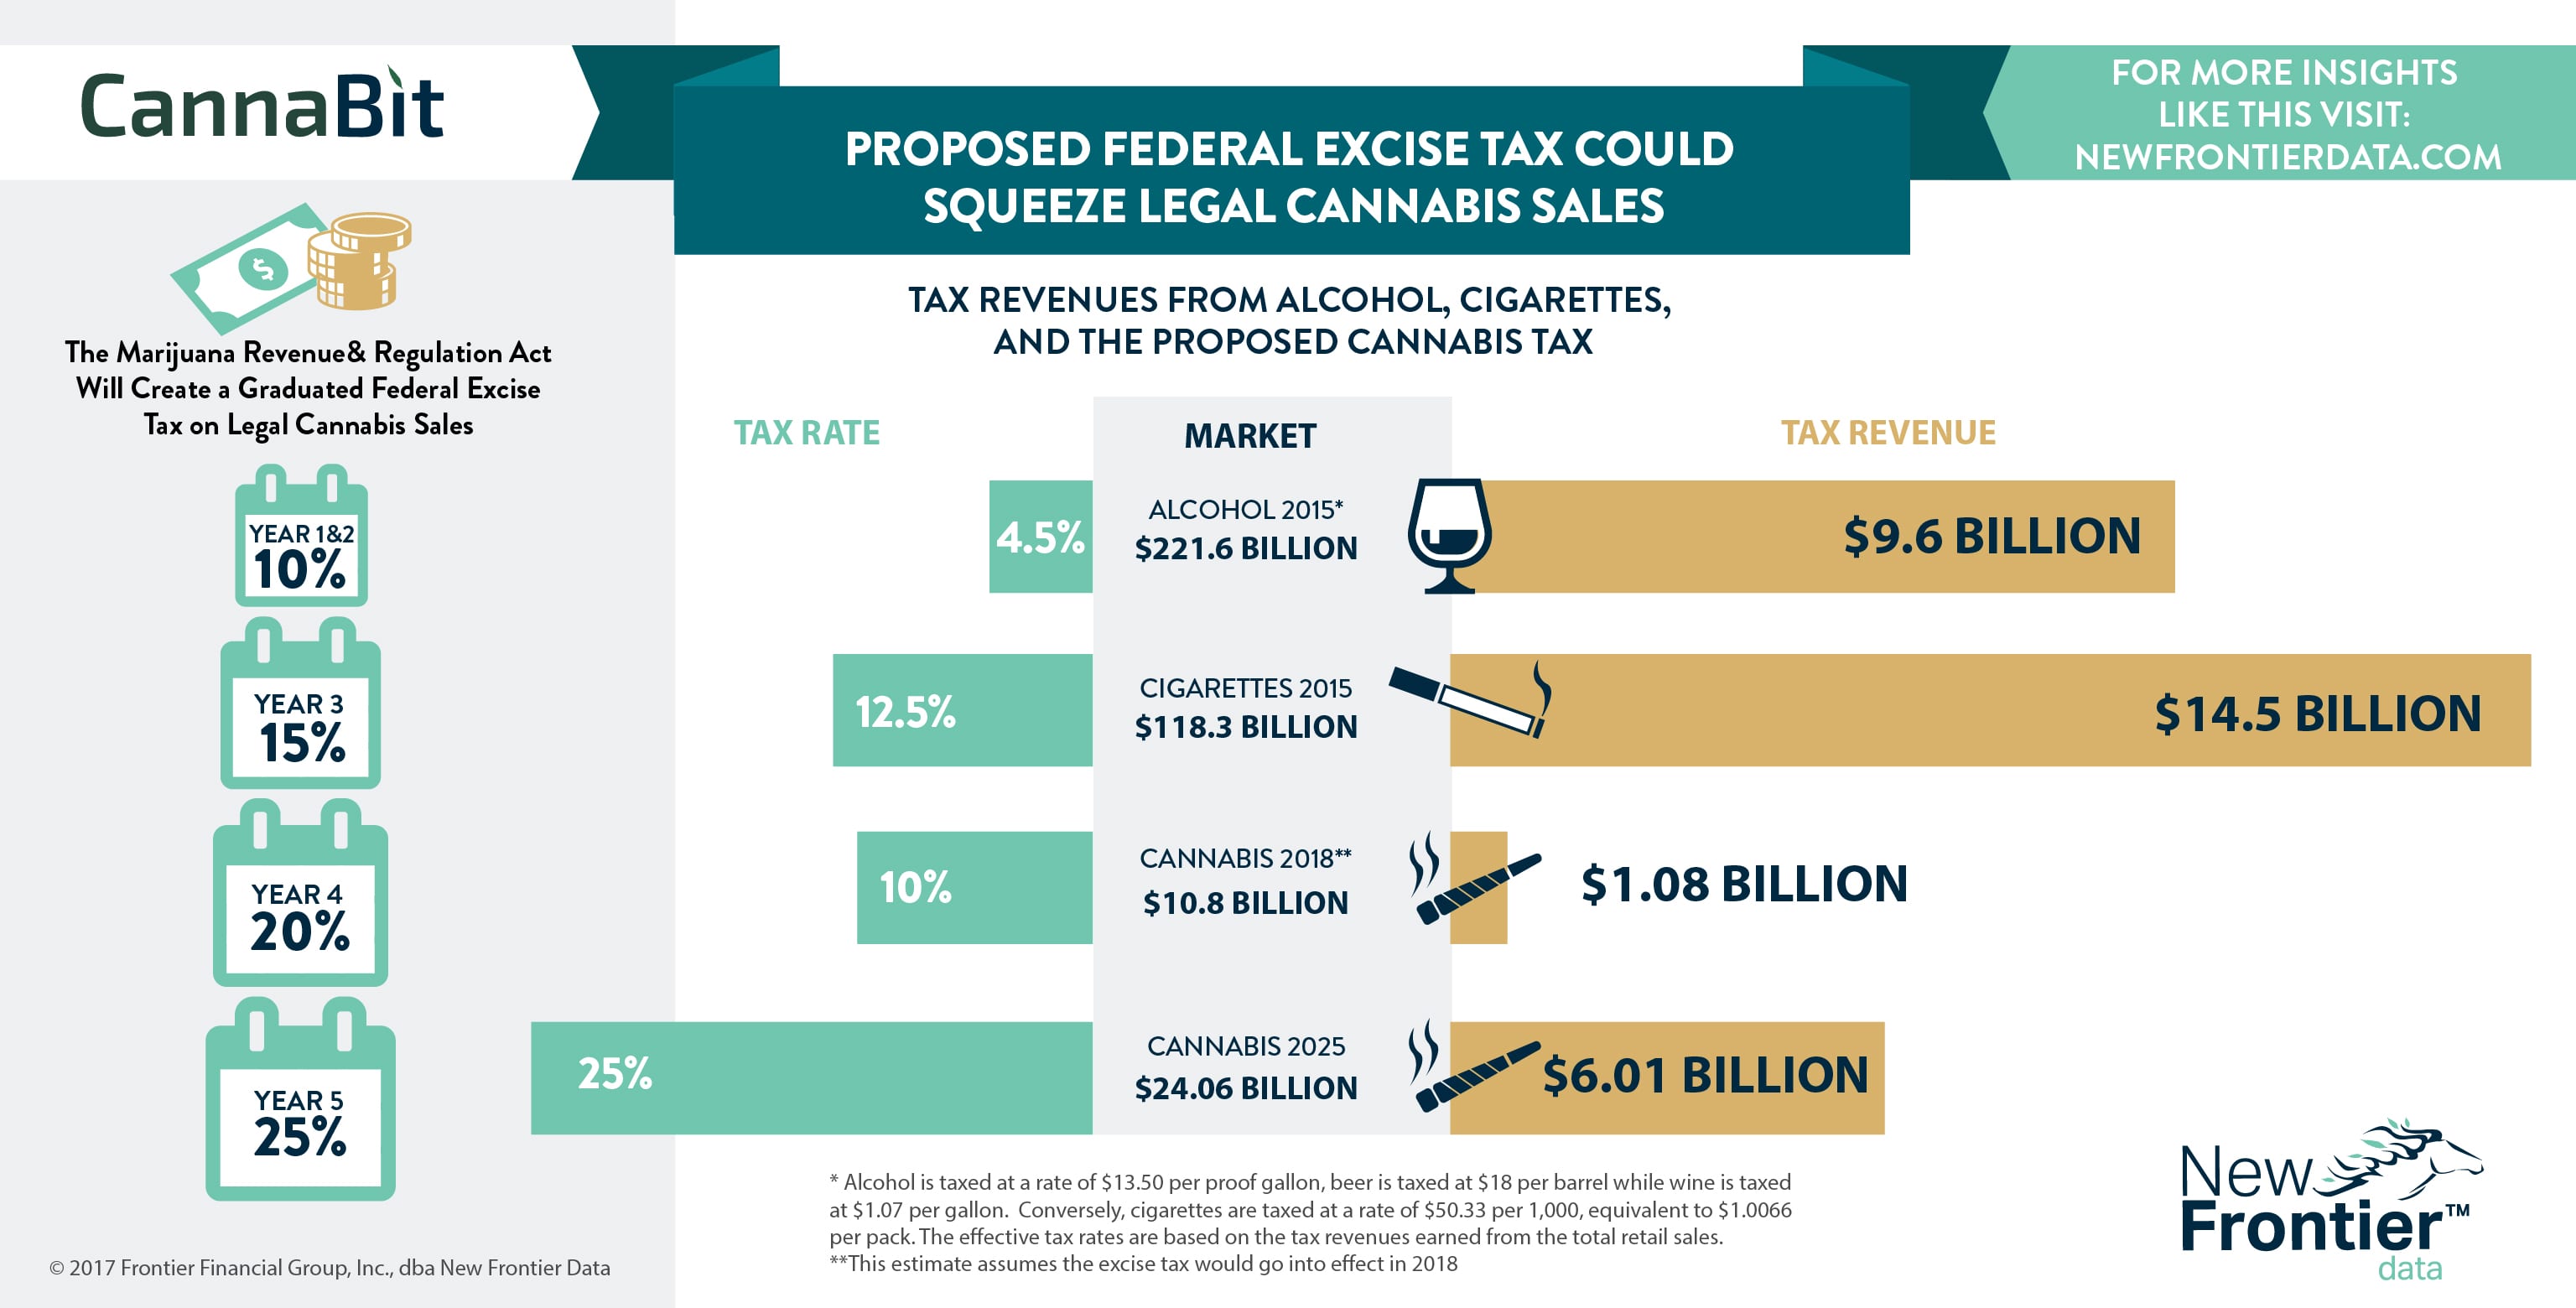 Cannabit: Proposed Federal Excise Tax Could Squeeze Legal Cannabis Sales/ 05282017